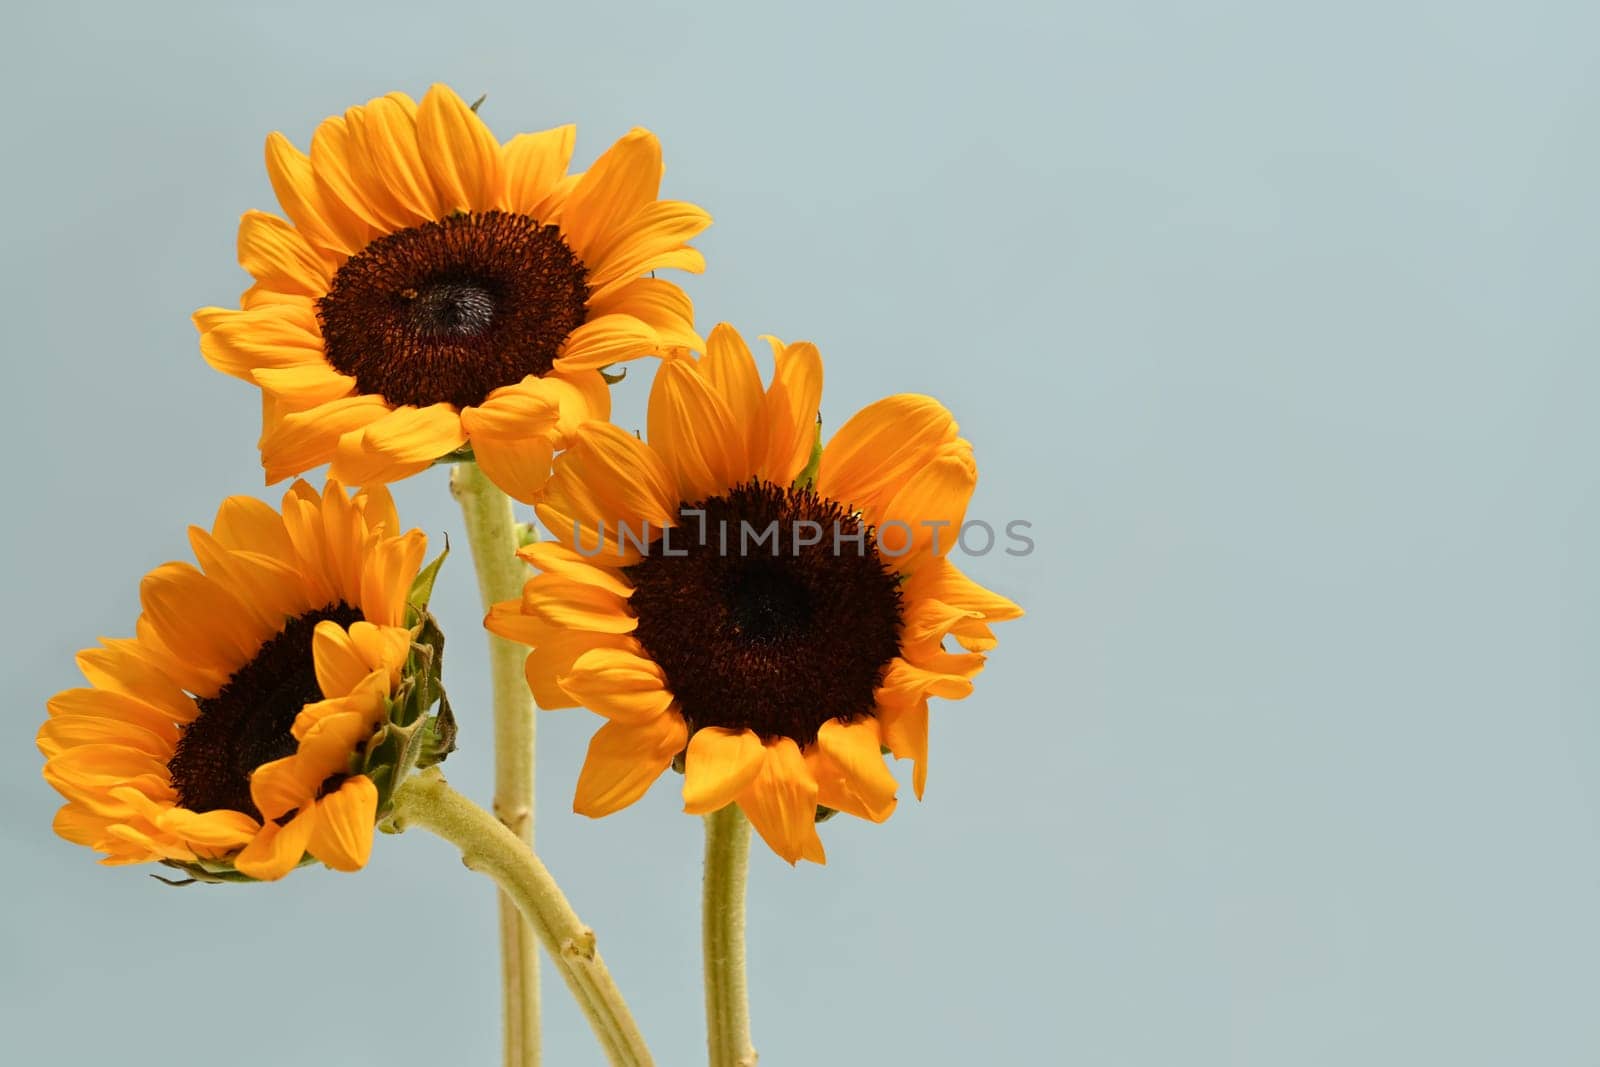 Bouquet of beautiful sunflowers on light blue background. Floral background, copy space for your text.